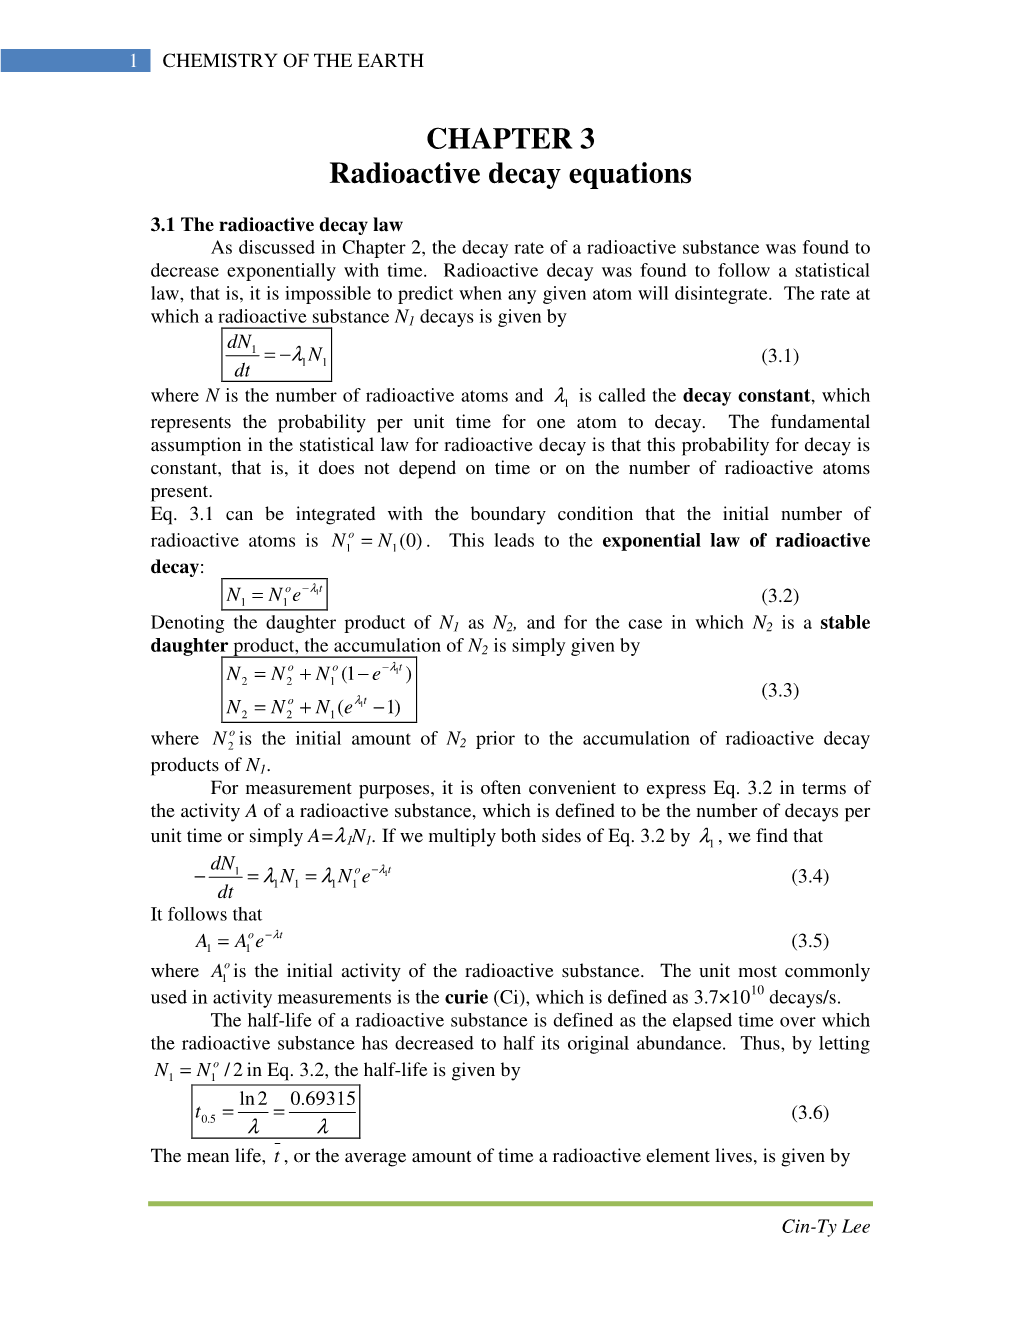 CHAPTER 3 Radioactive Decay Equations